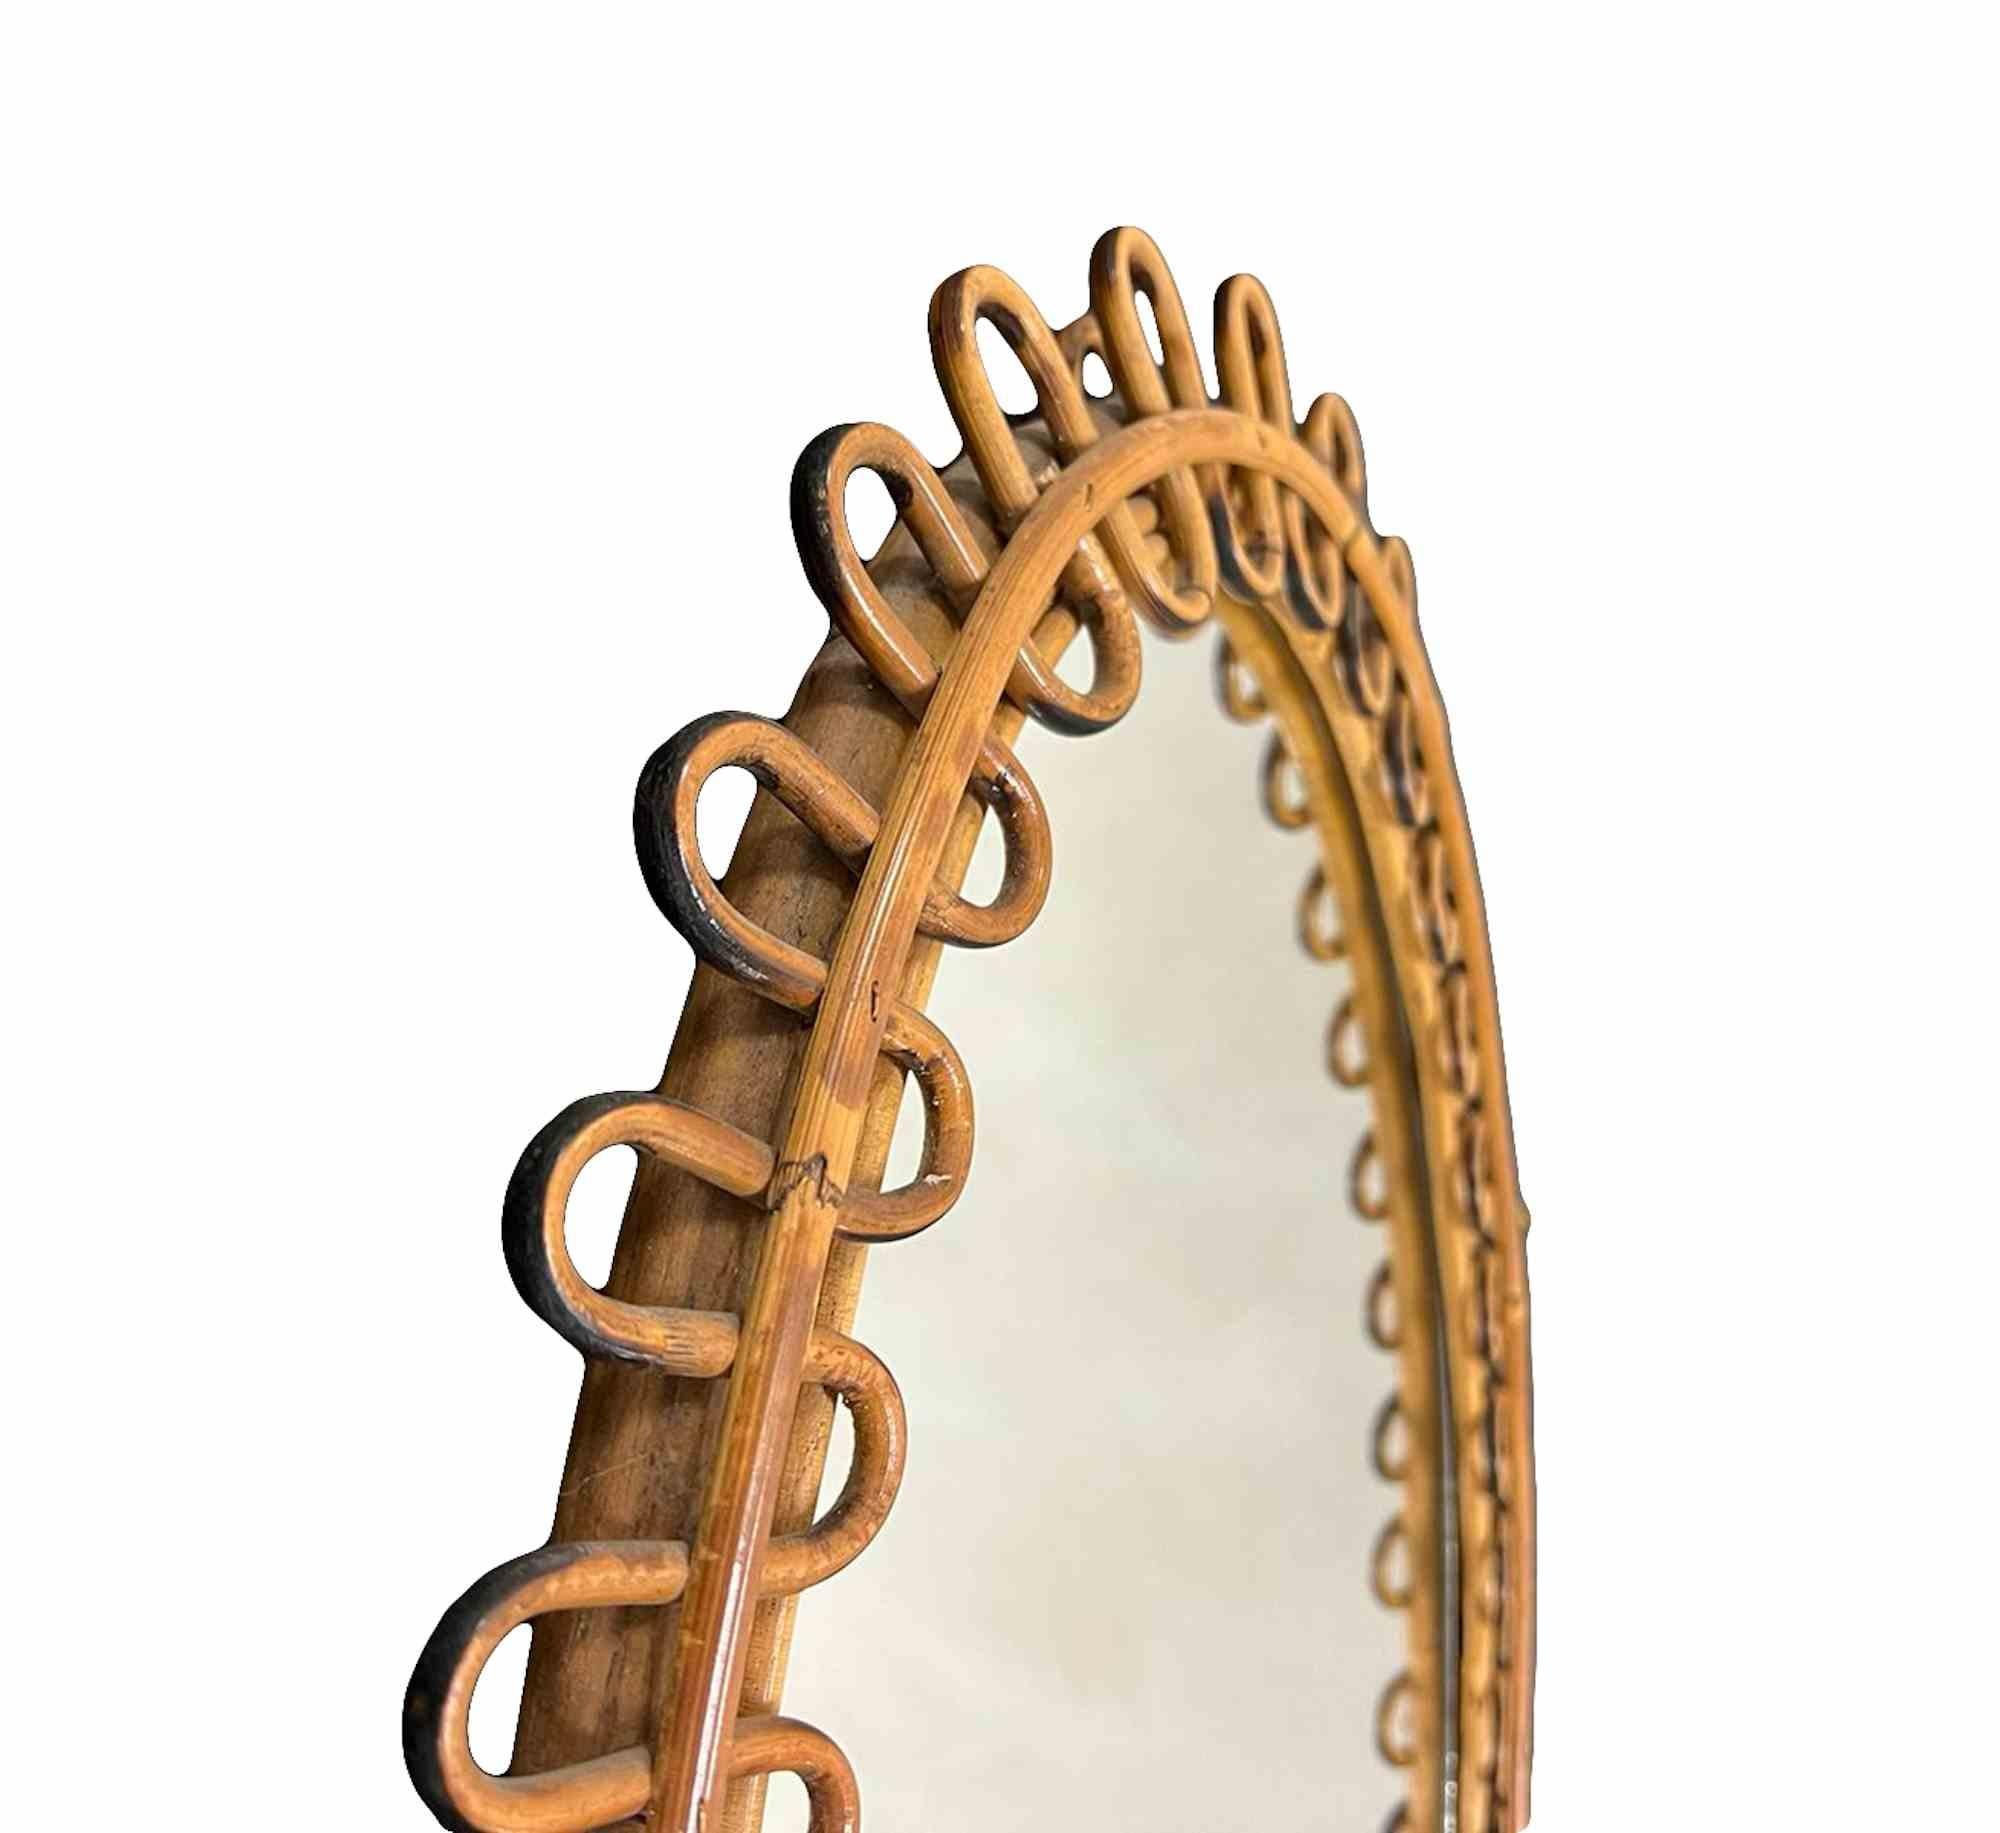 Vintage Wicker Mirror by Franco Albini for Bonacina, realized in the 1960s.
Very good condition.